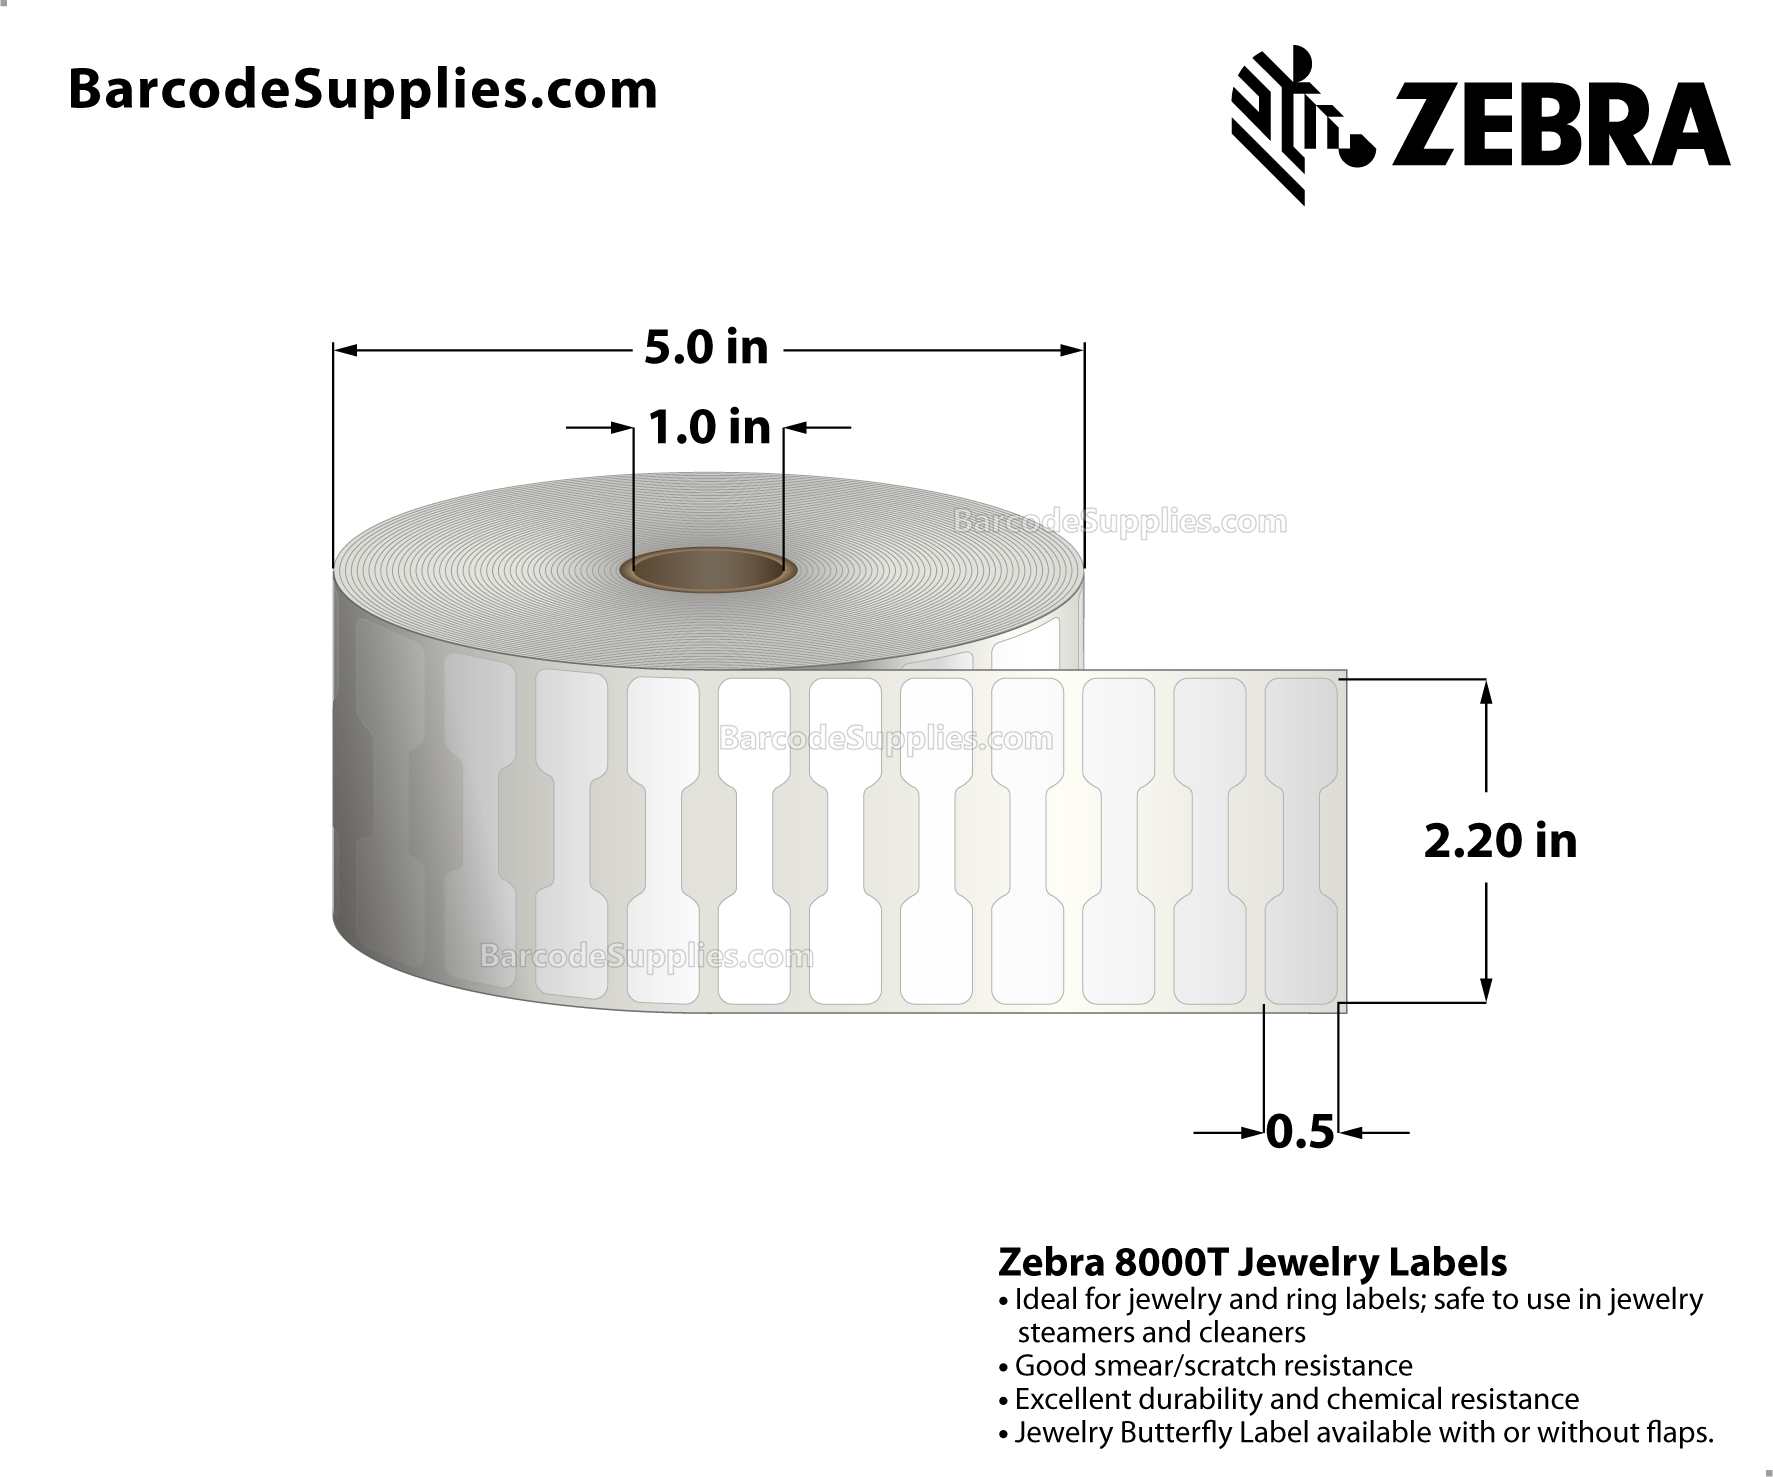 2.2 x 0.5 Thermal Transfer White 8000T Jewelry (Jewelry Butterfly Label w/o flaps) Labels With Permanent Adhesive - Not Perforated - 3510 Labels Per Roll - Carton Of 6 Rolls - 21060 Labels Total - MPN: 10010066